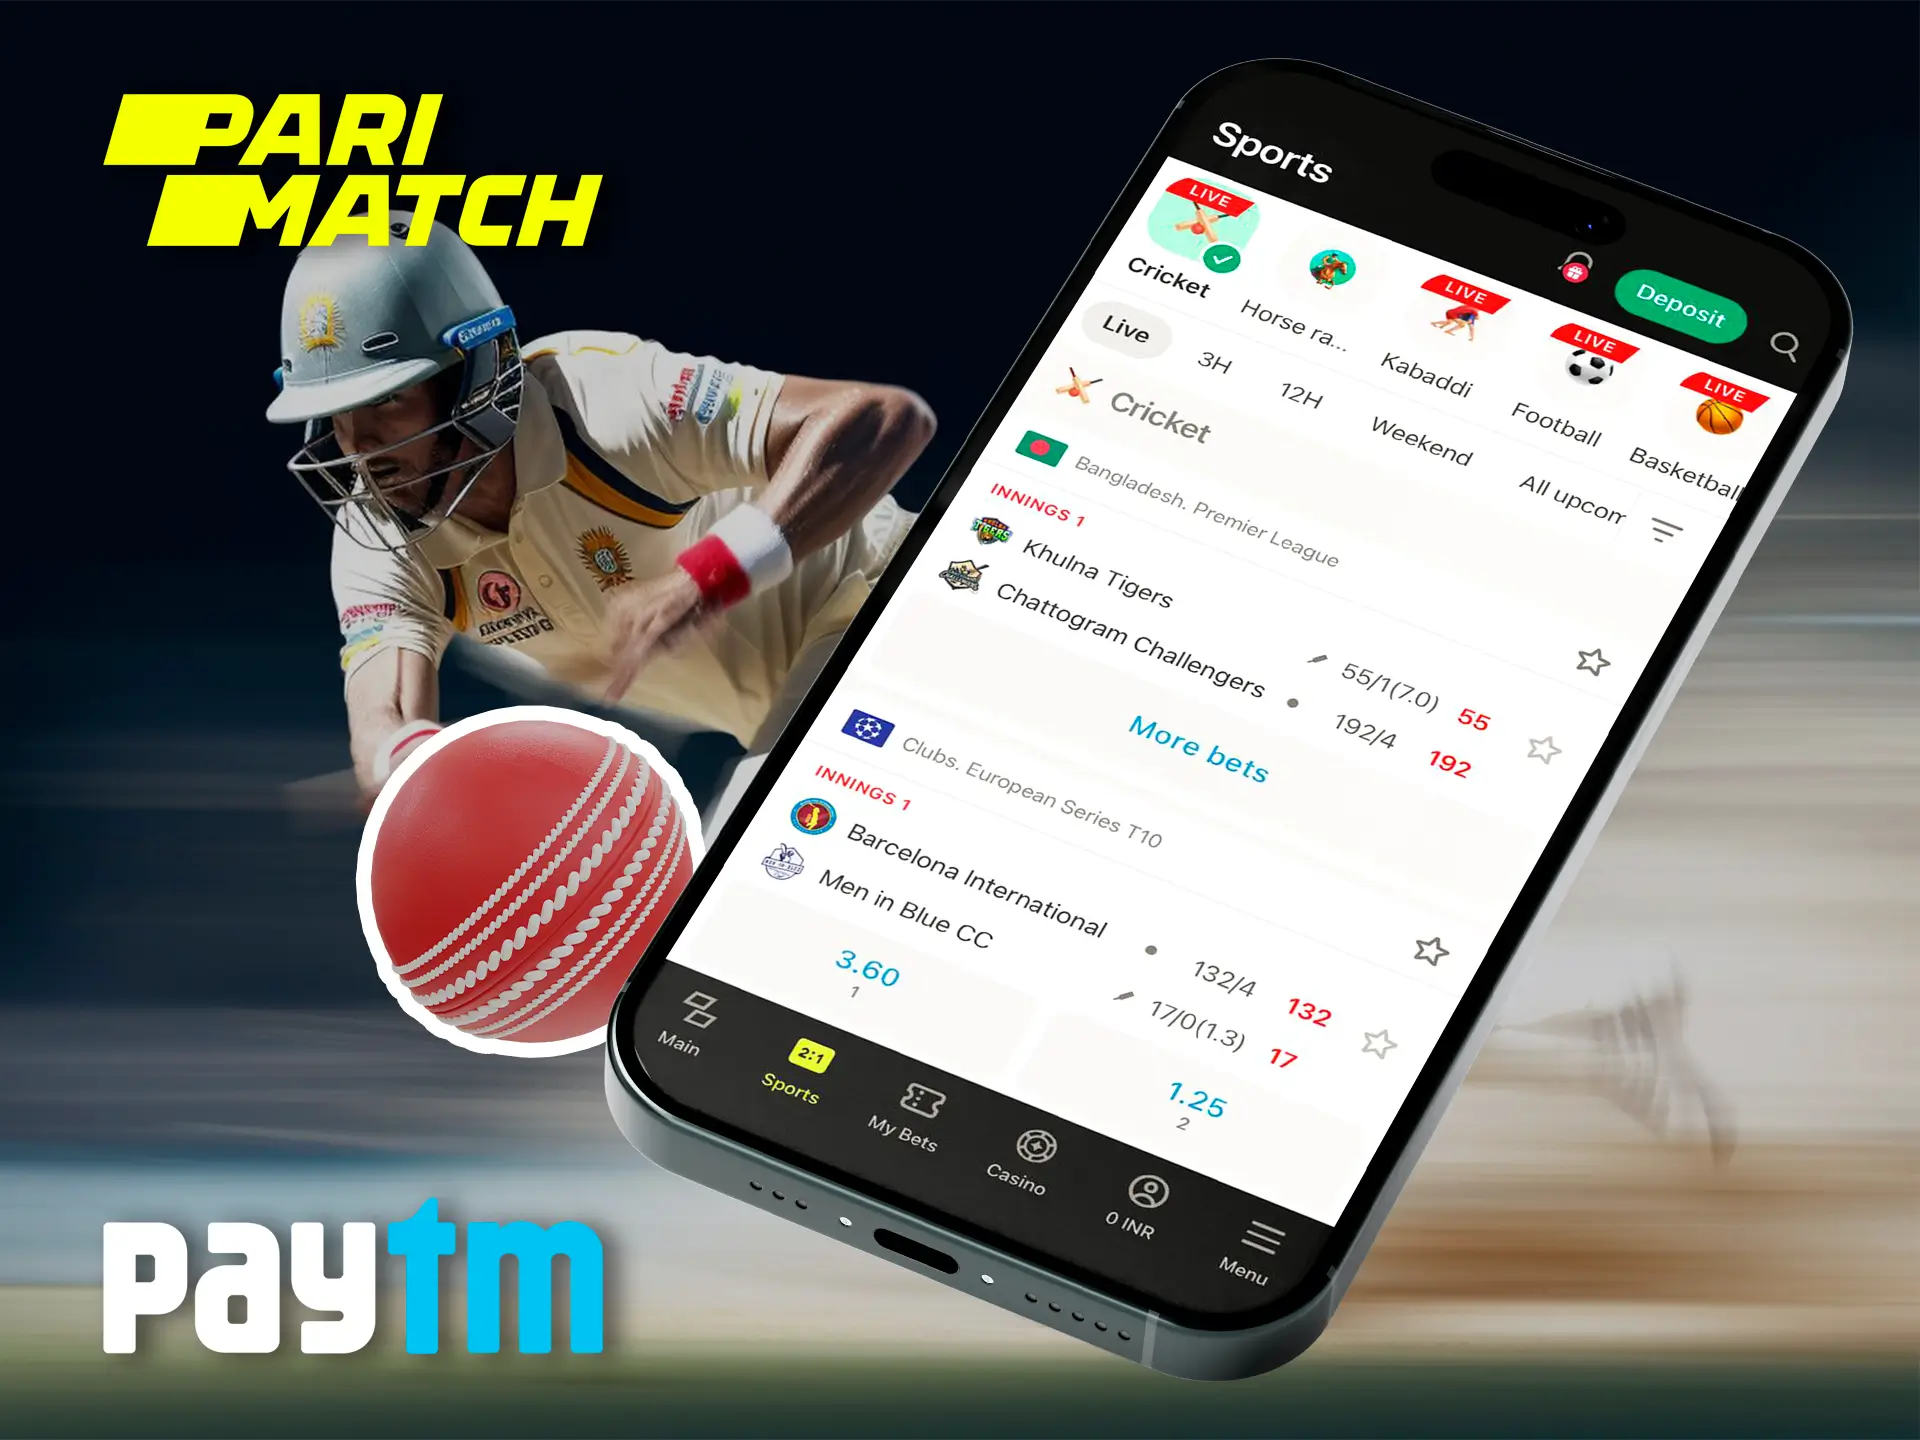 The Parimatch app has a wide range of functionality and all deposit methods including PayTM.